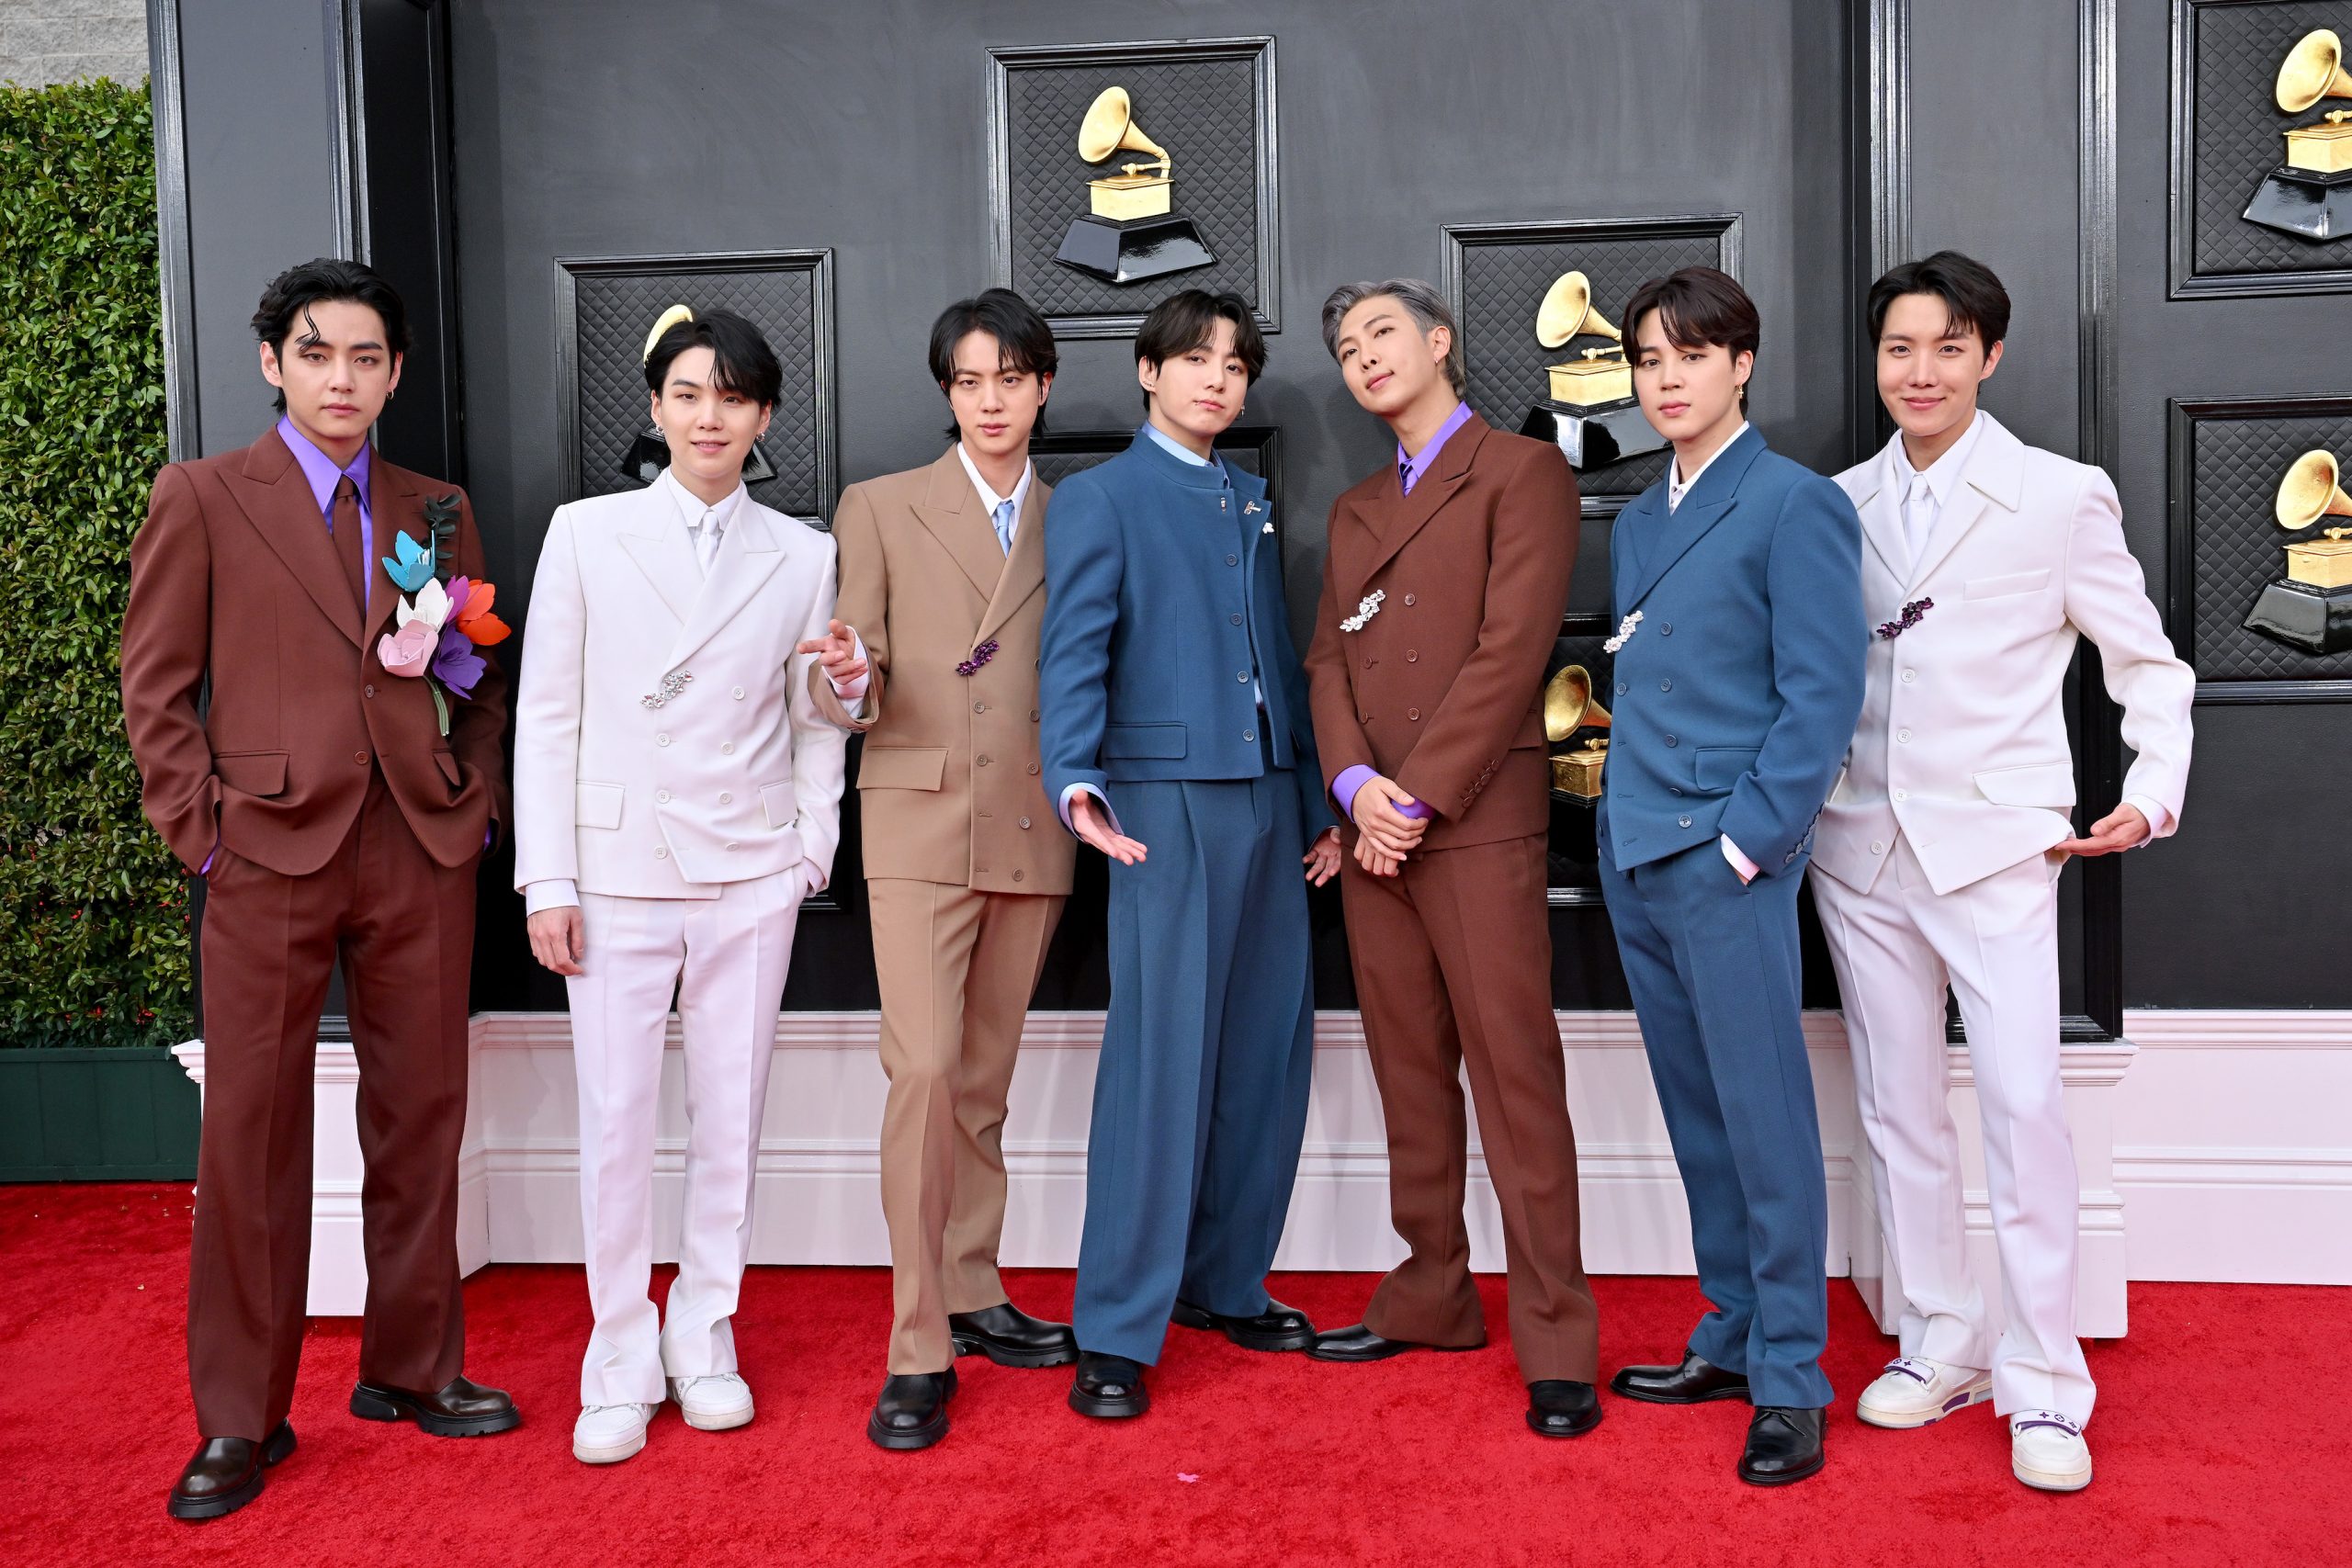 What Would BTS Wear If They Attended the Met Gala 2021?